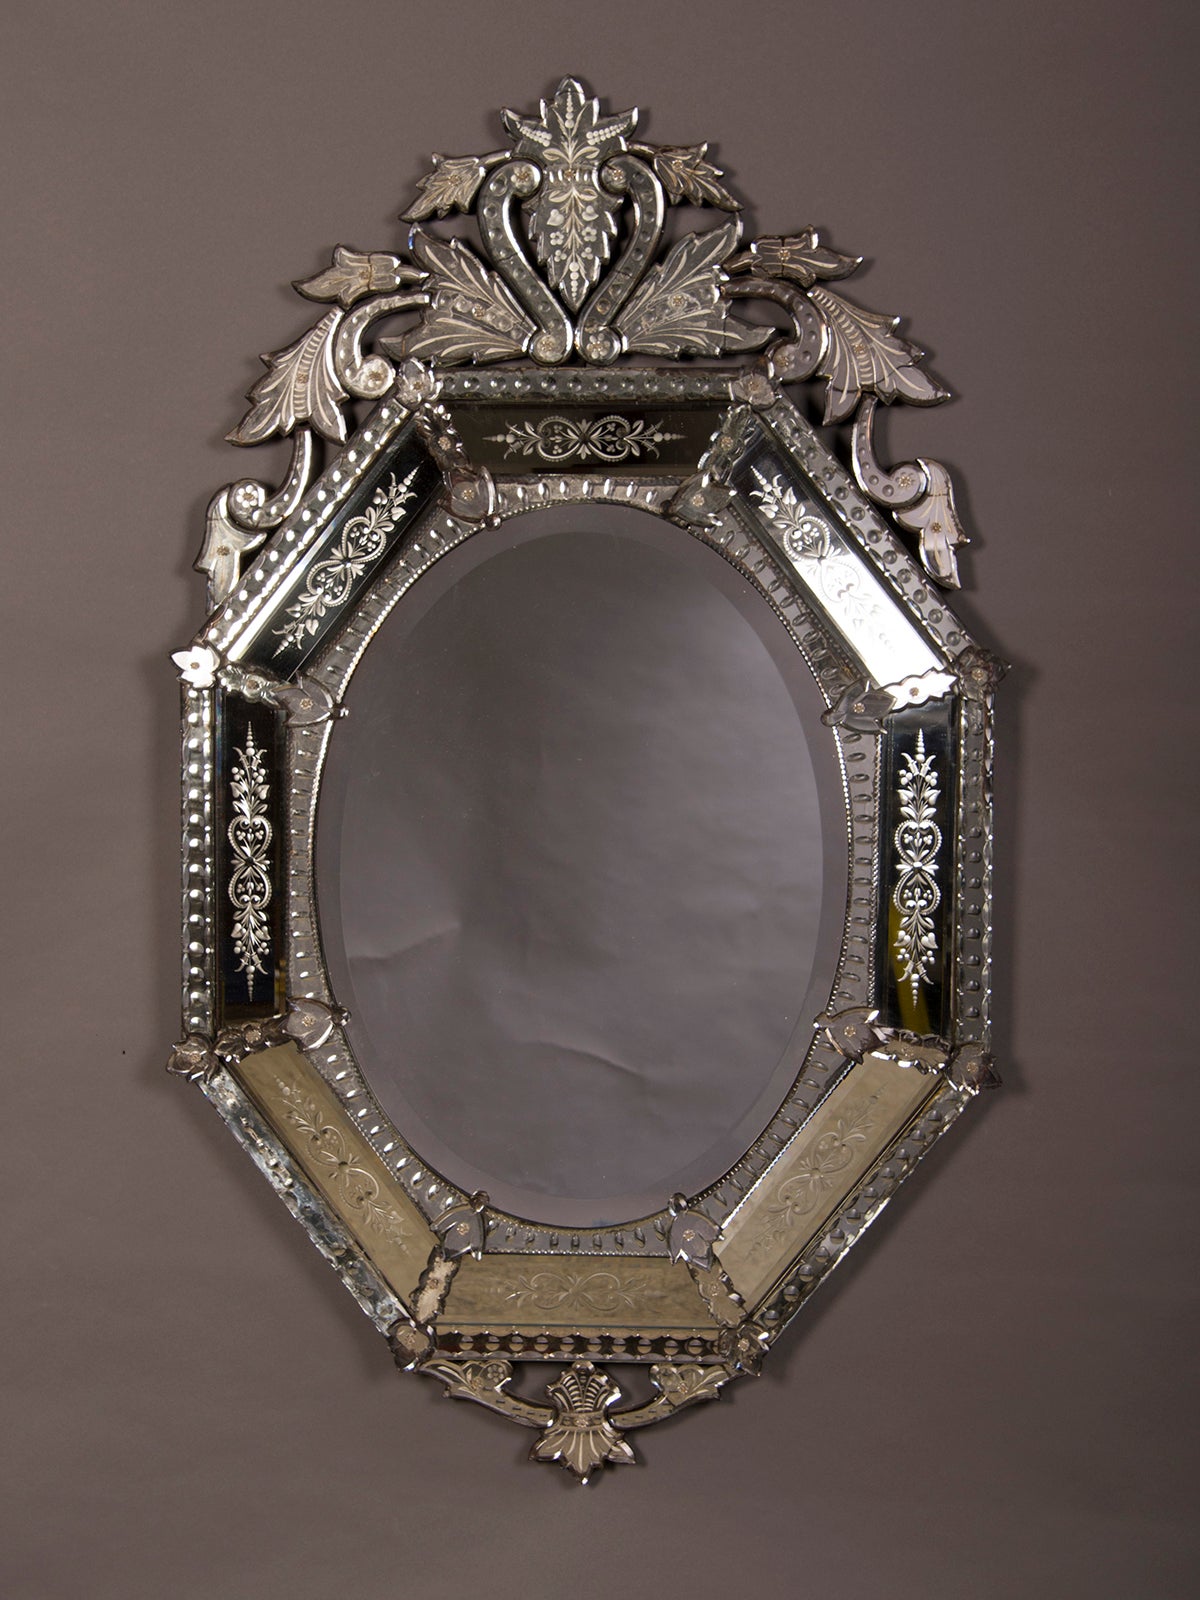 A superb octagonal Venetian etched glass mirror from Murano, Italy c. 1890